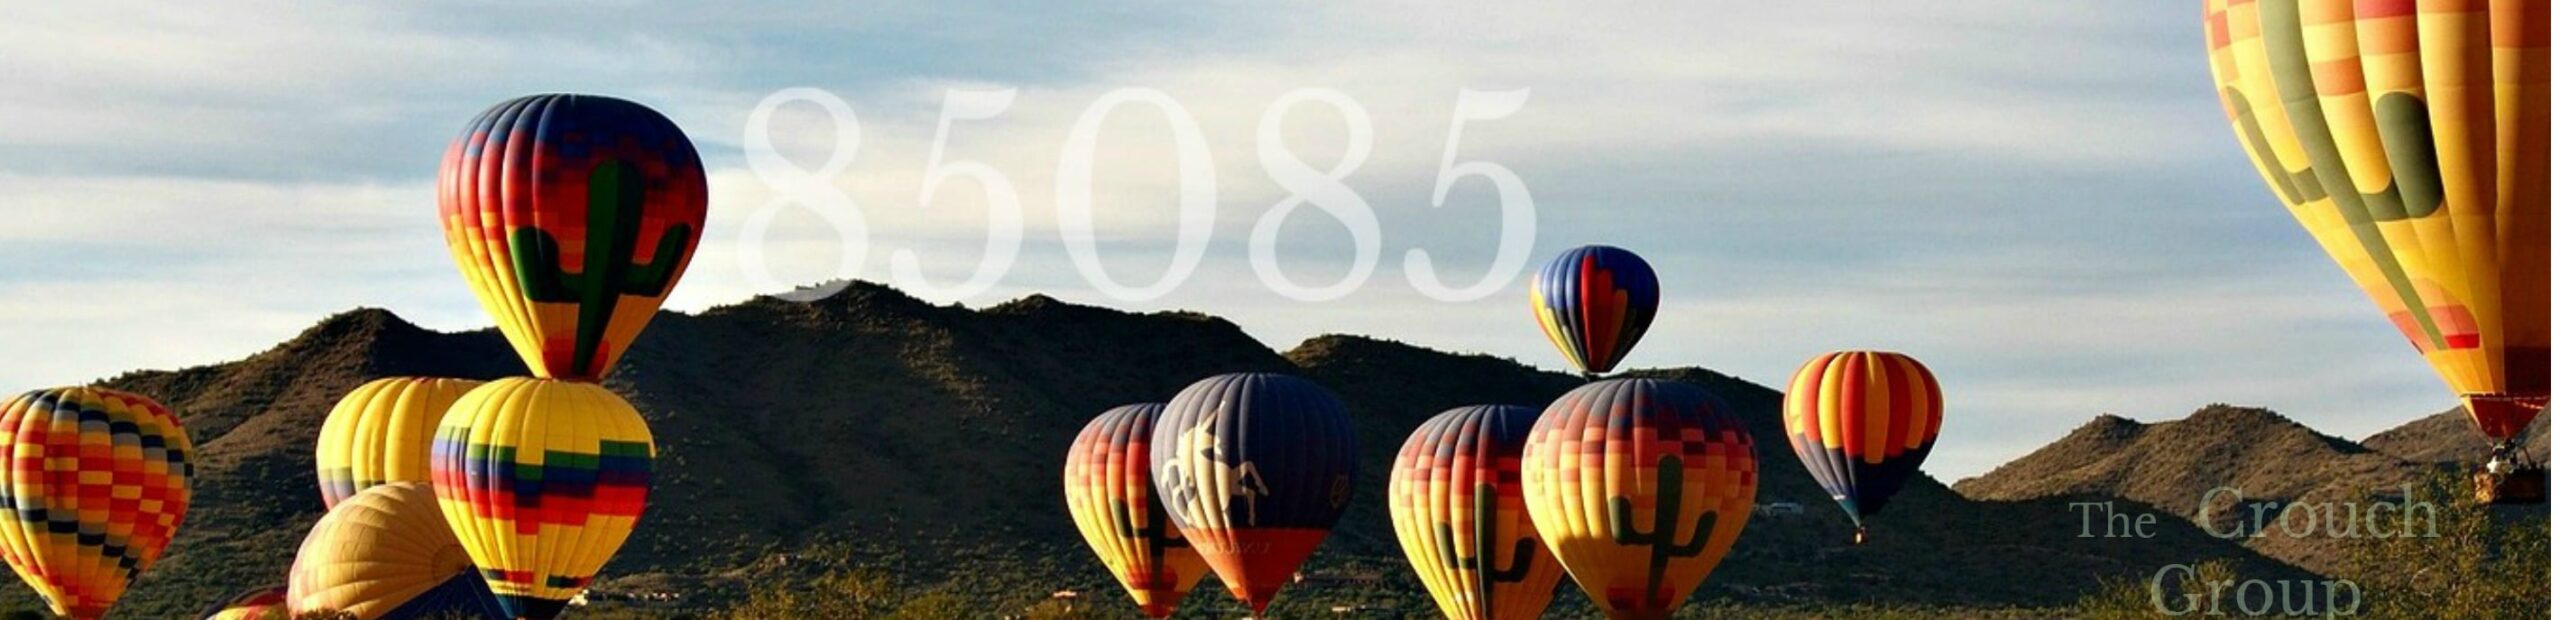 Balloons launching over Norterra mountains in 85085